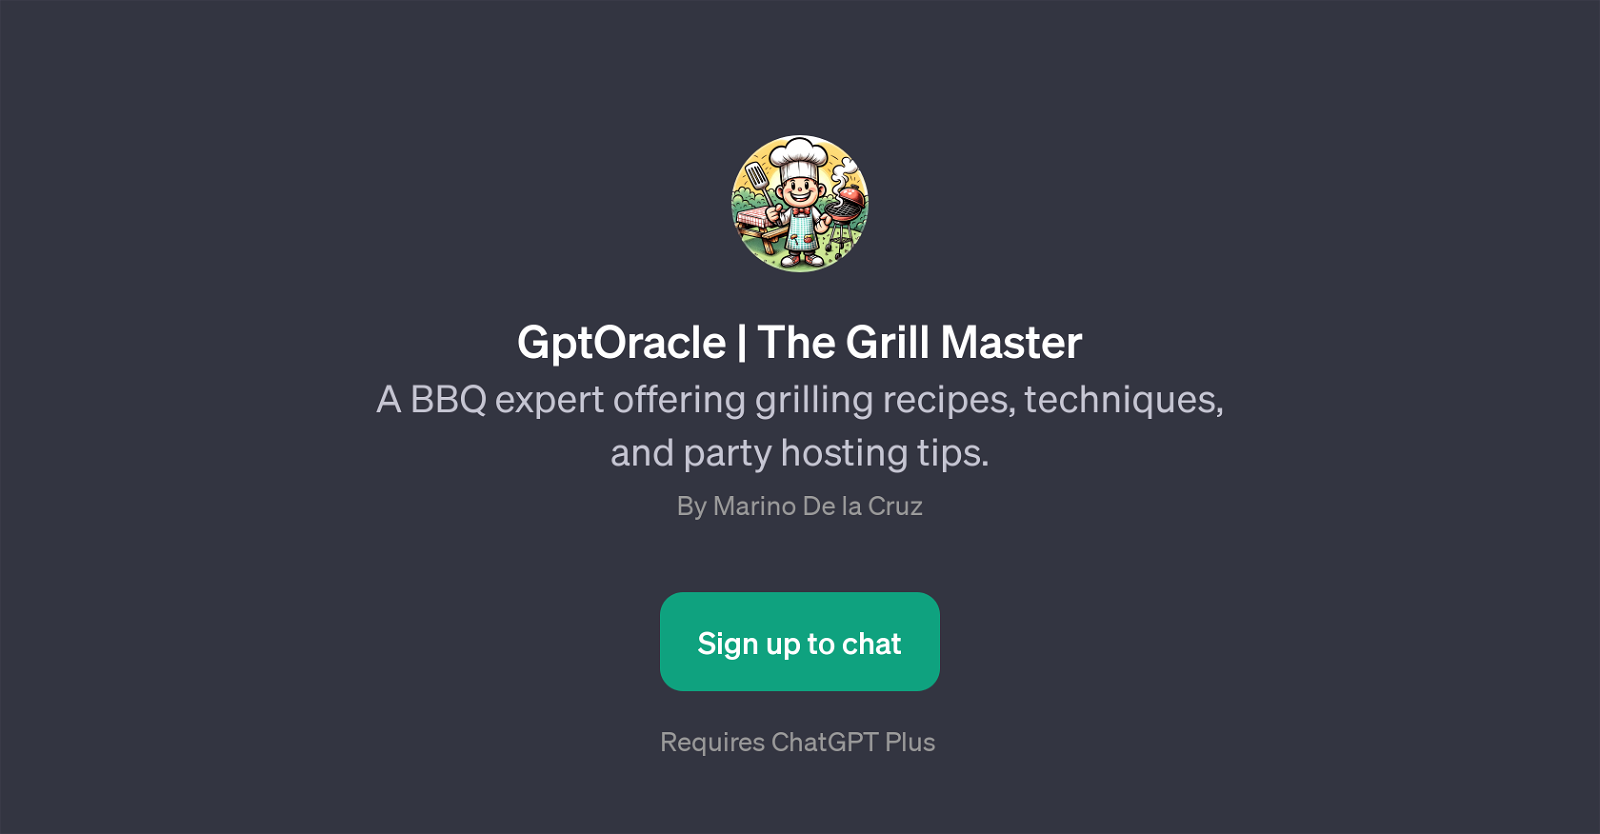 GptOracle | The Grill Master website